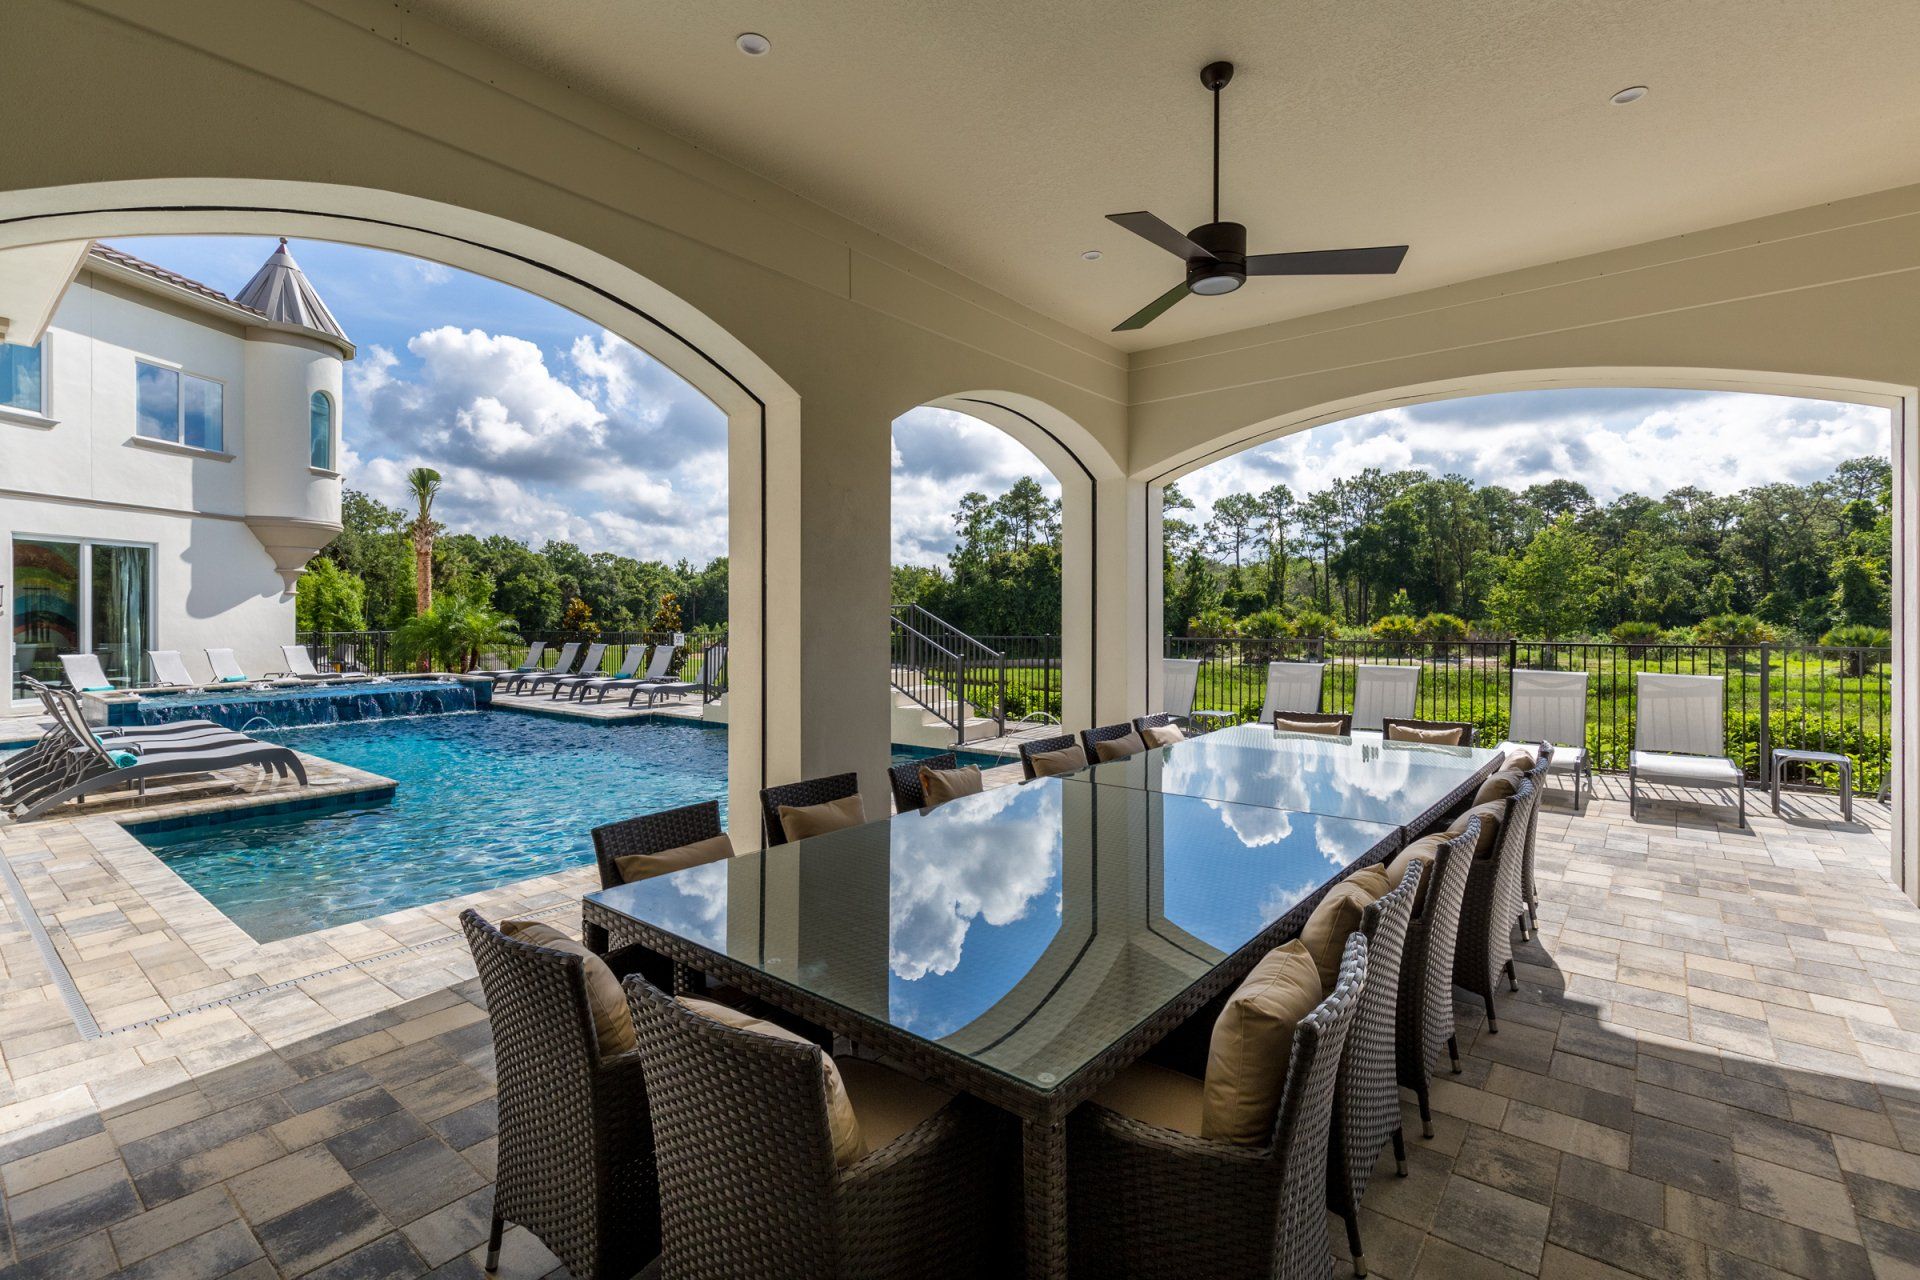 there is a large table and chairs on the patio with a pool in the background